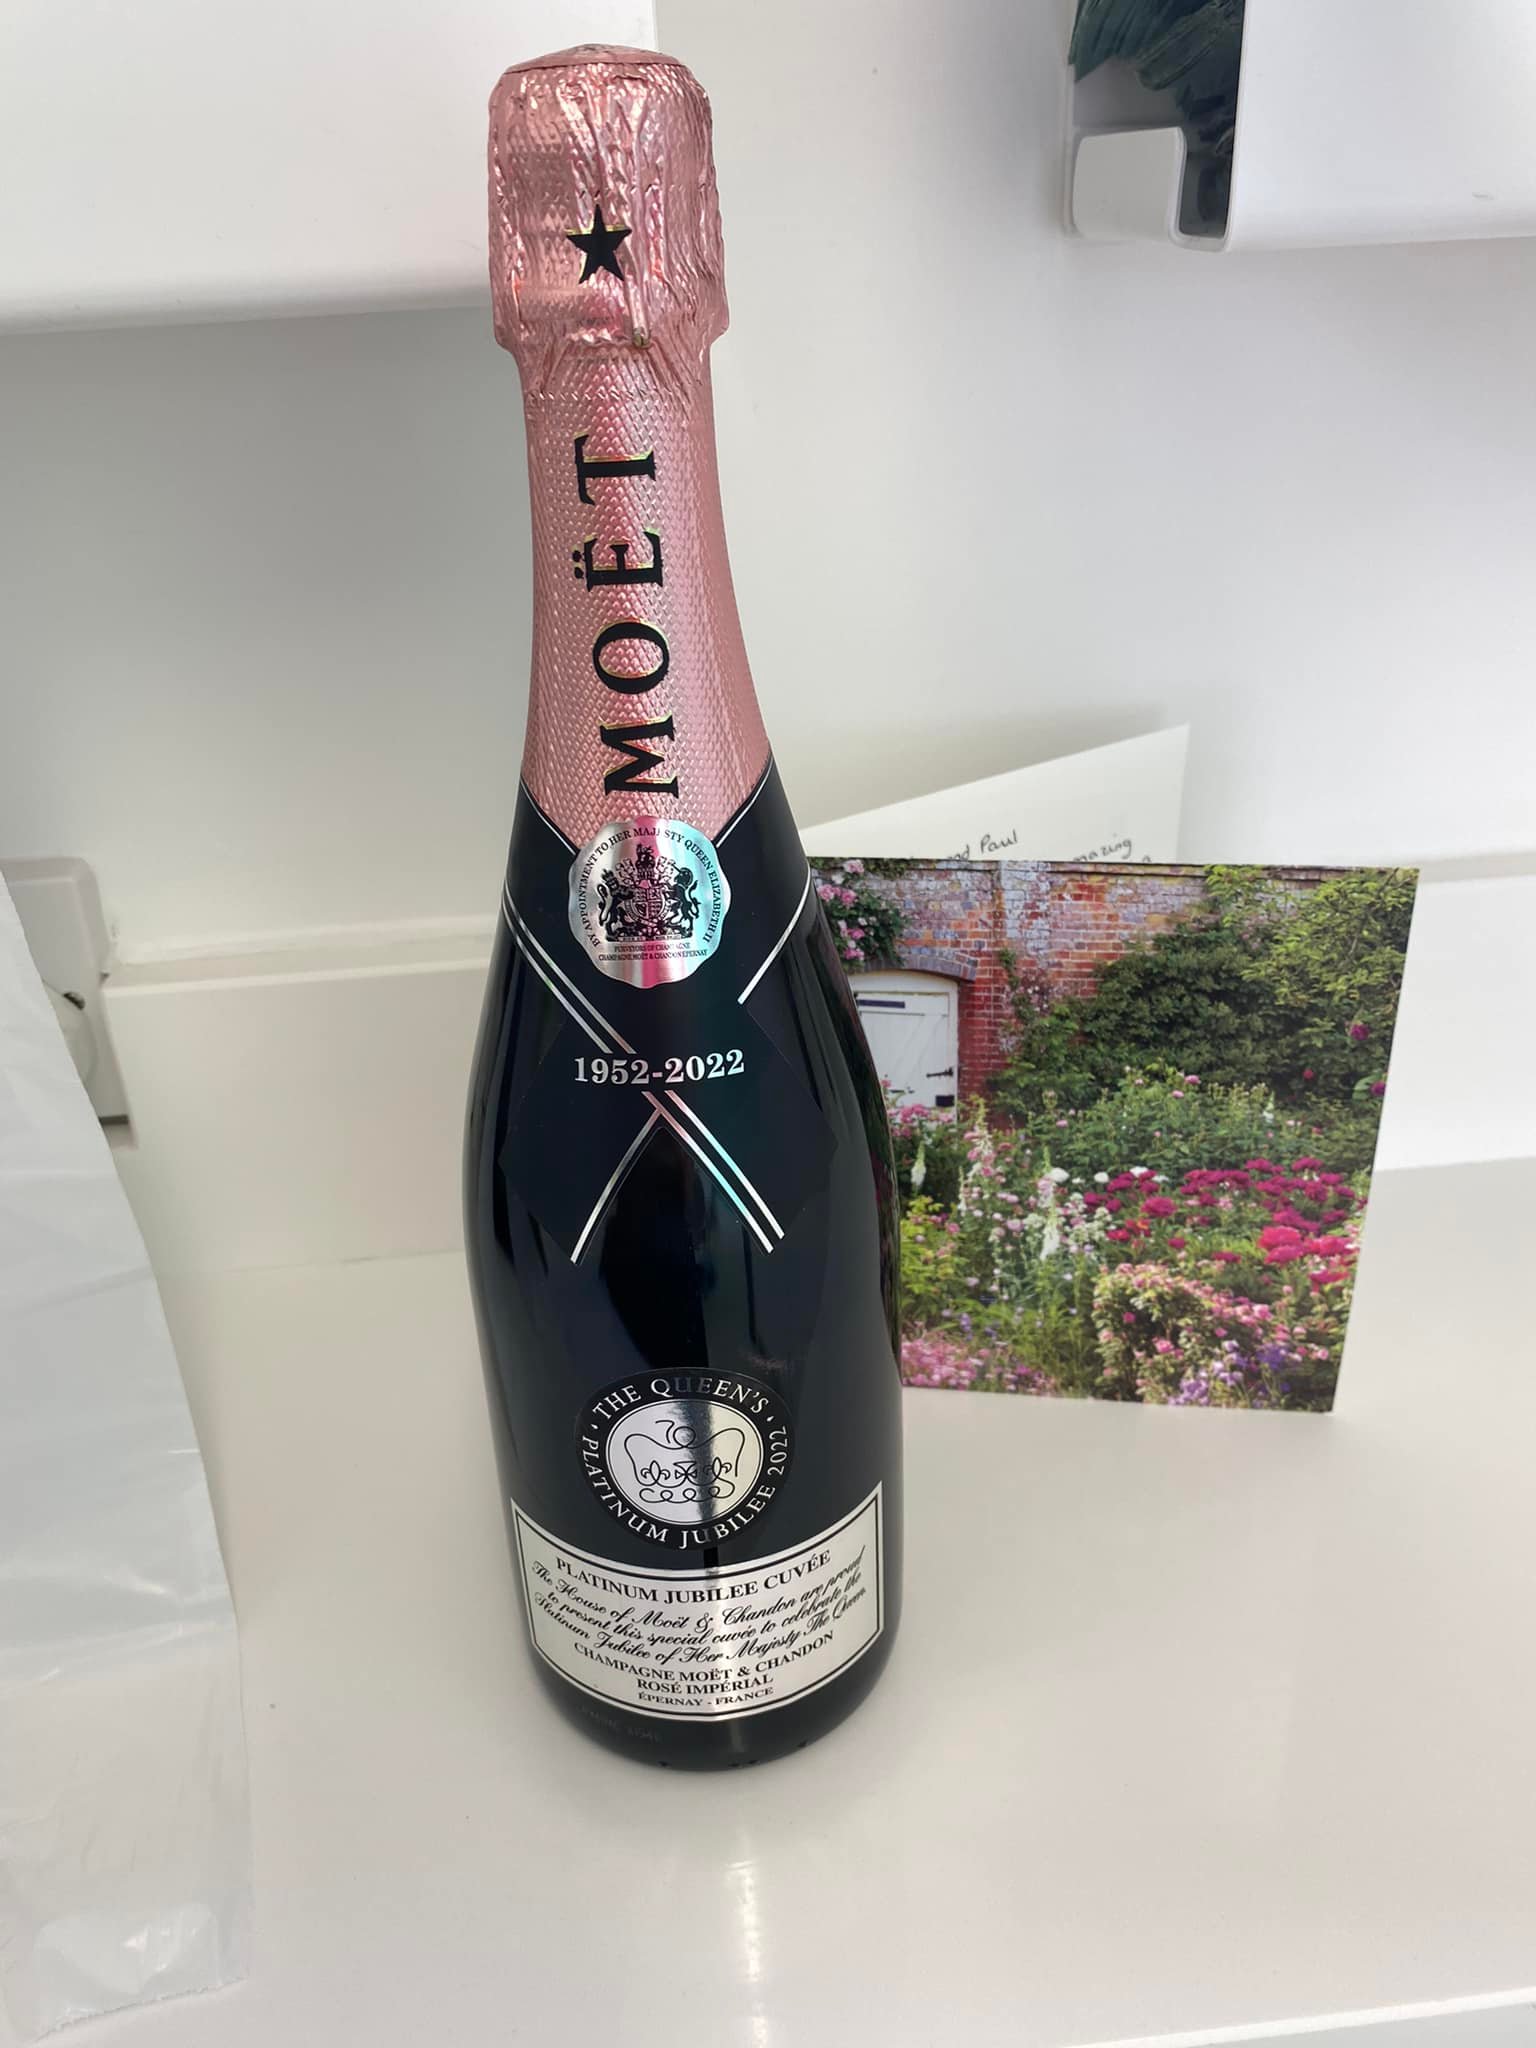 Caroline's gift of a card and champaign for Katy & Paul